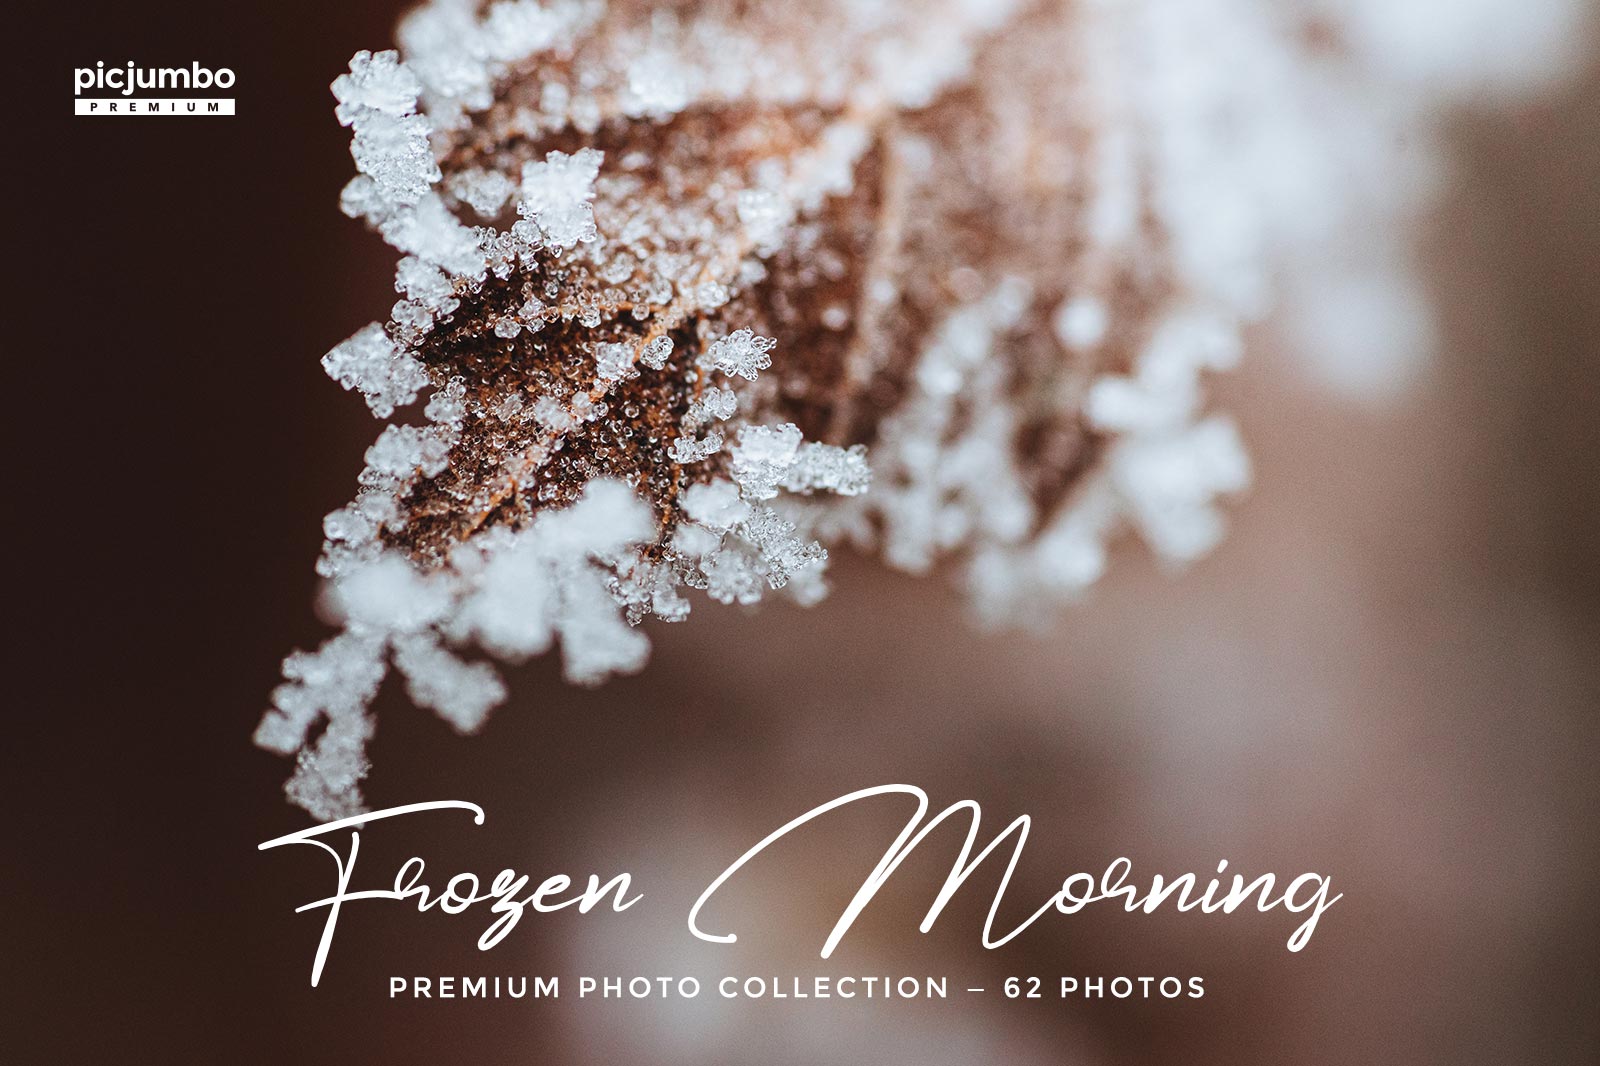 Download hi-res stock photos from our Frozen Morning PREMIUM Collection!